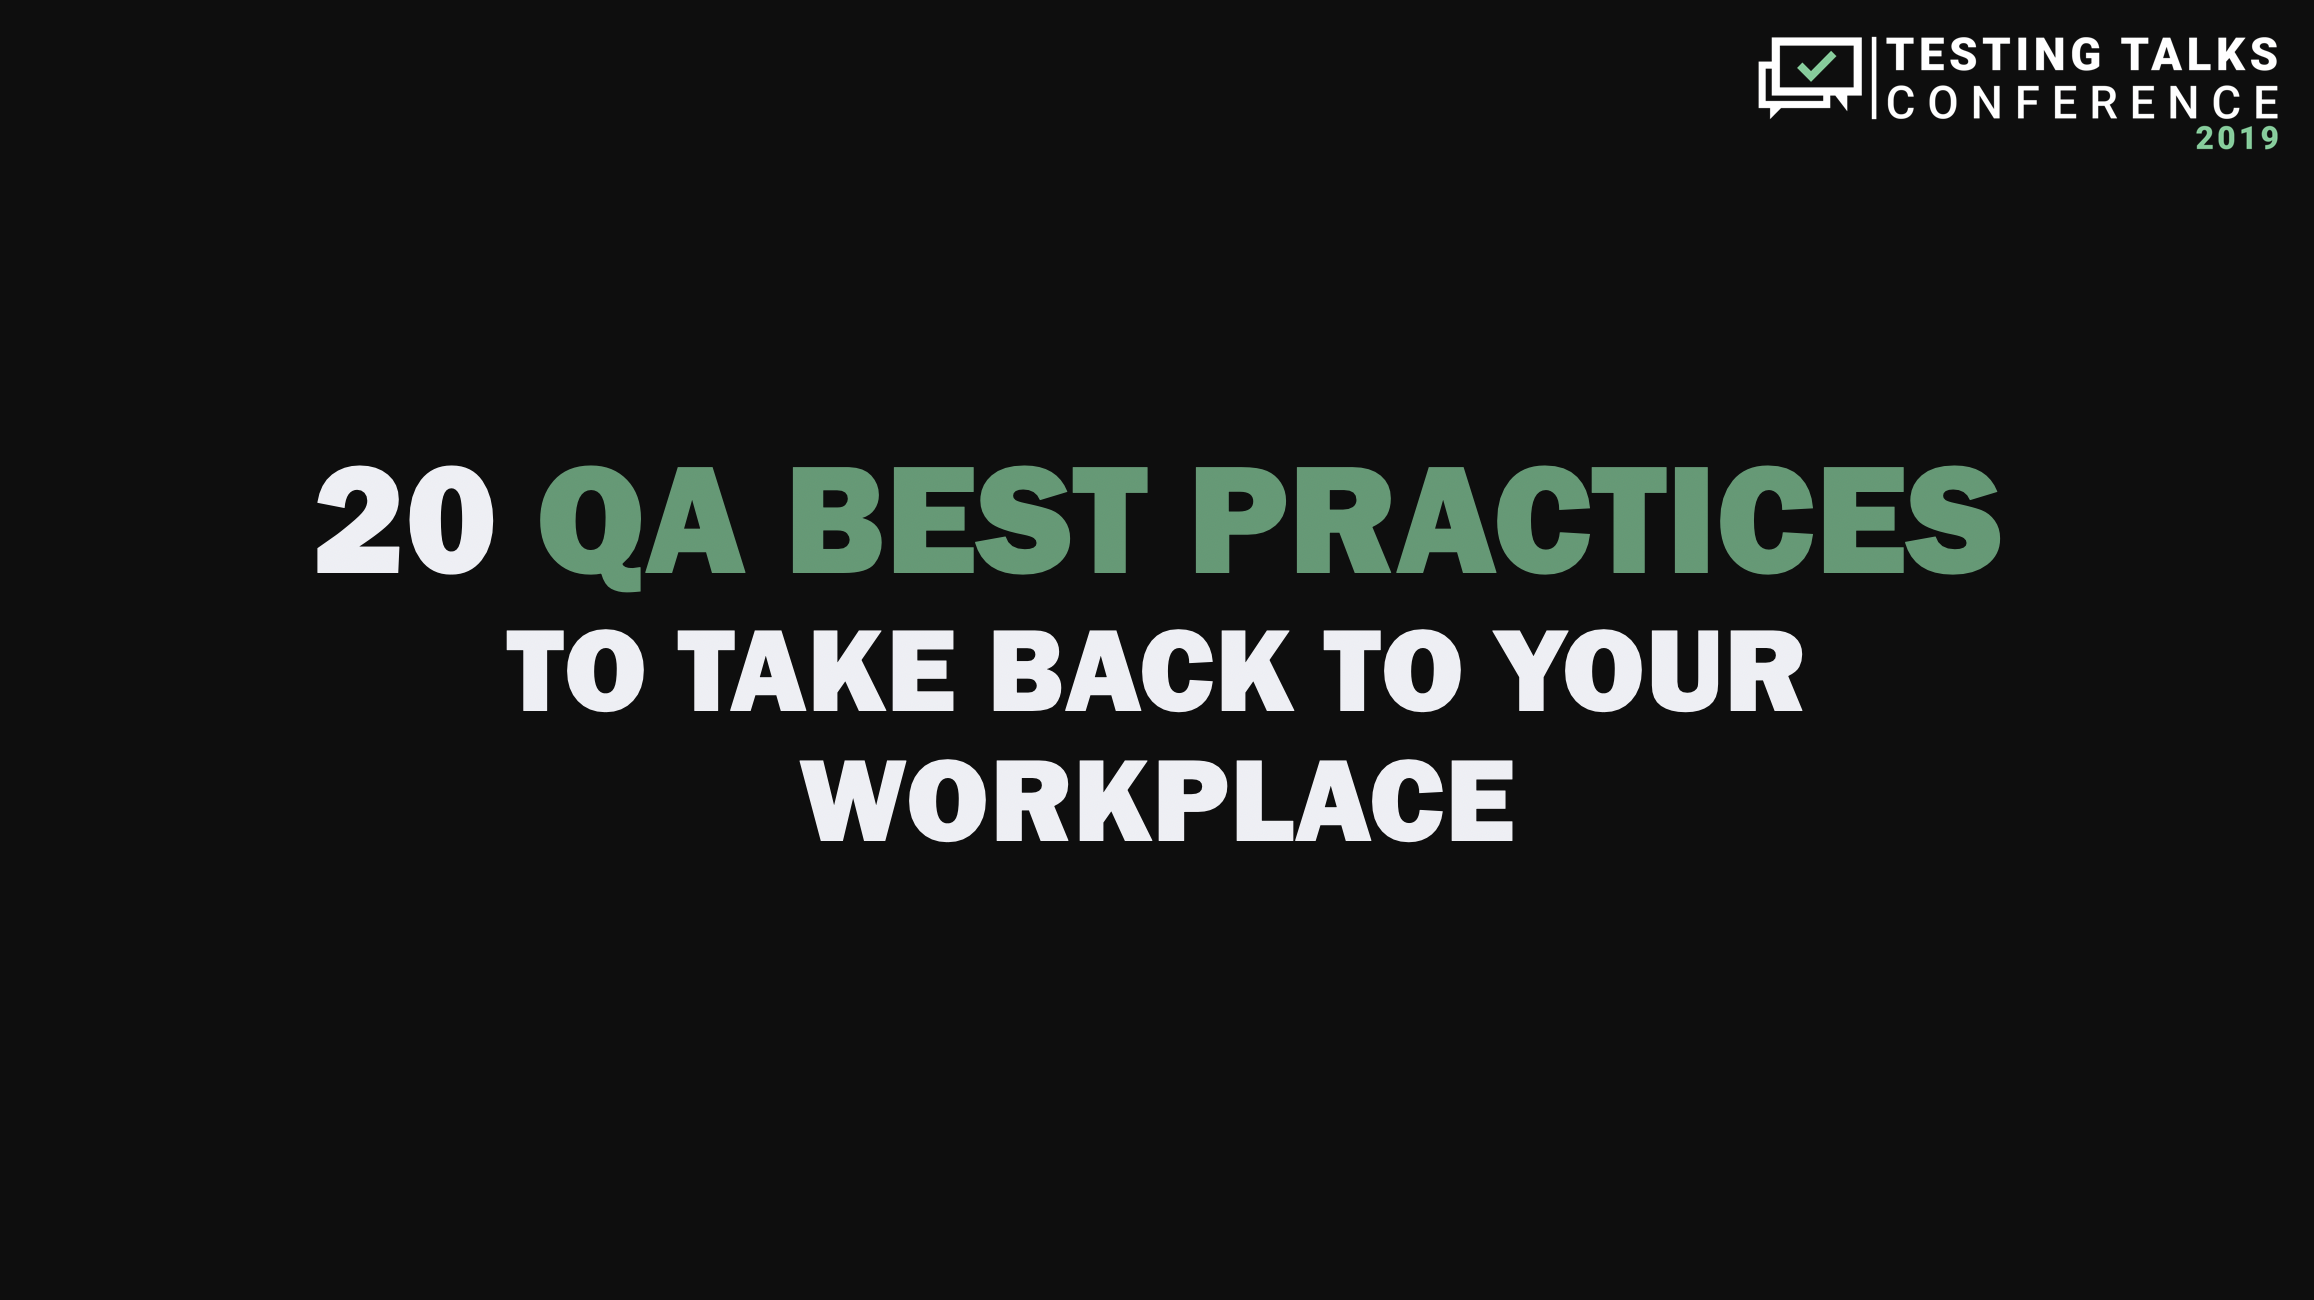 20 QA Best Practices to take back to your workplace